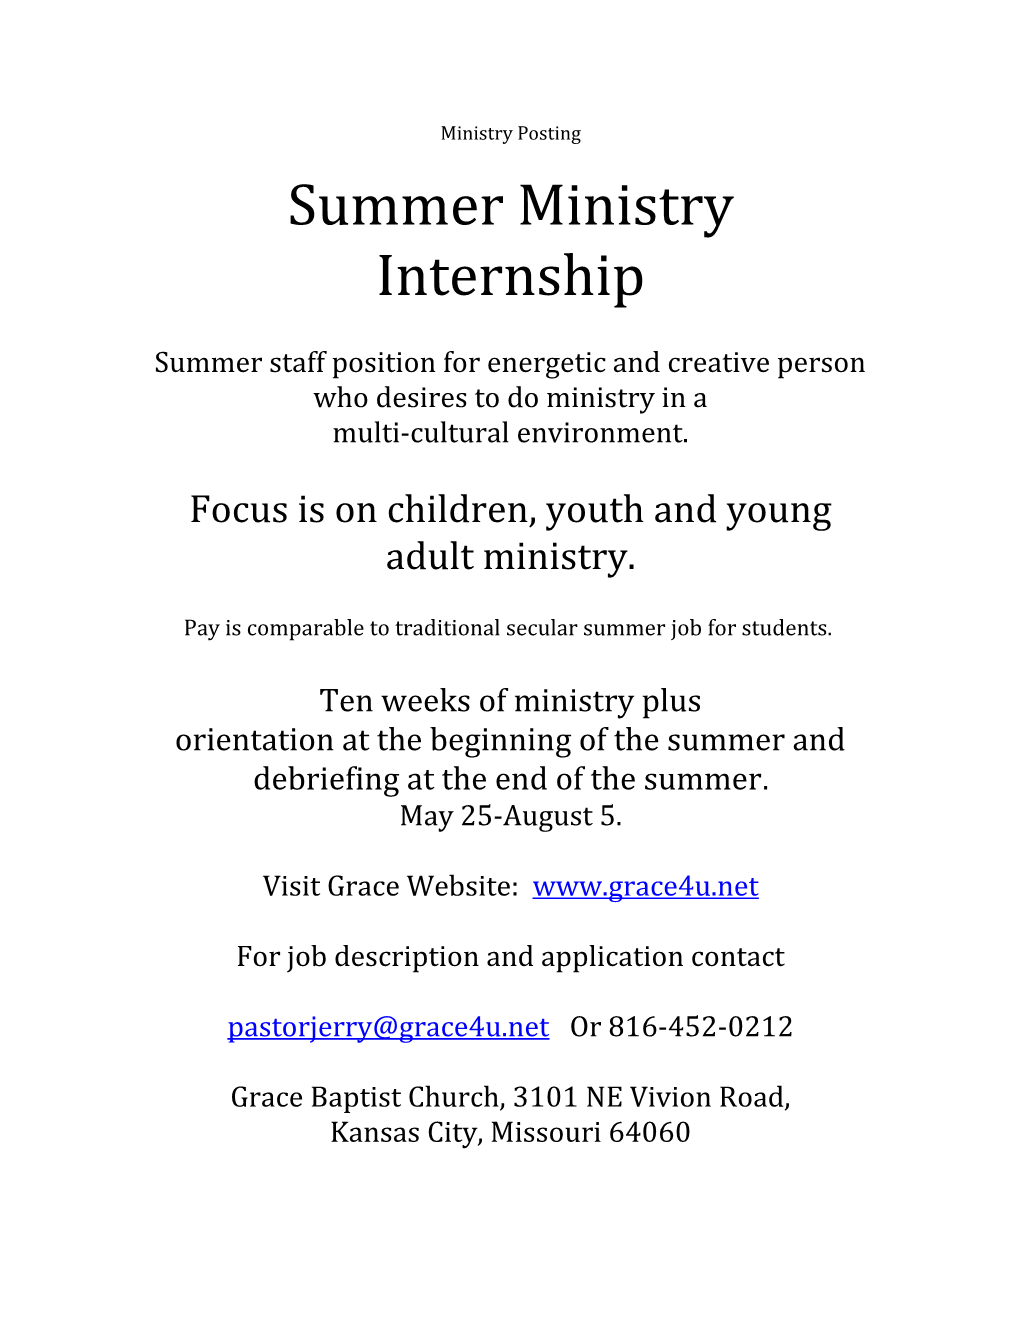 Summer Staff Position for Energetic and Creative Person Who Desires to Do Ministry in A